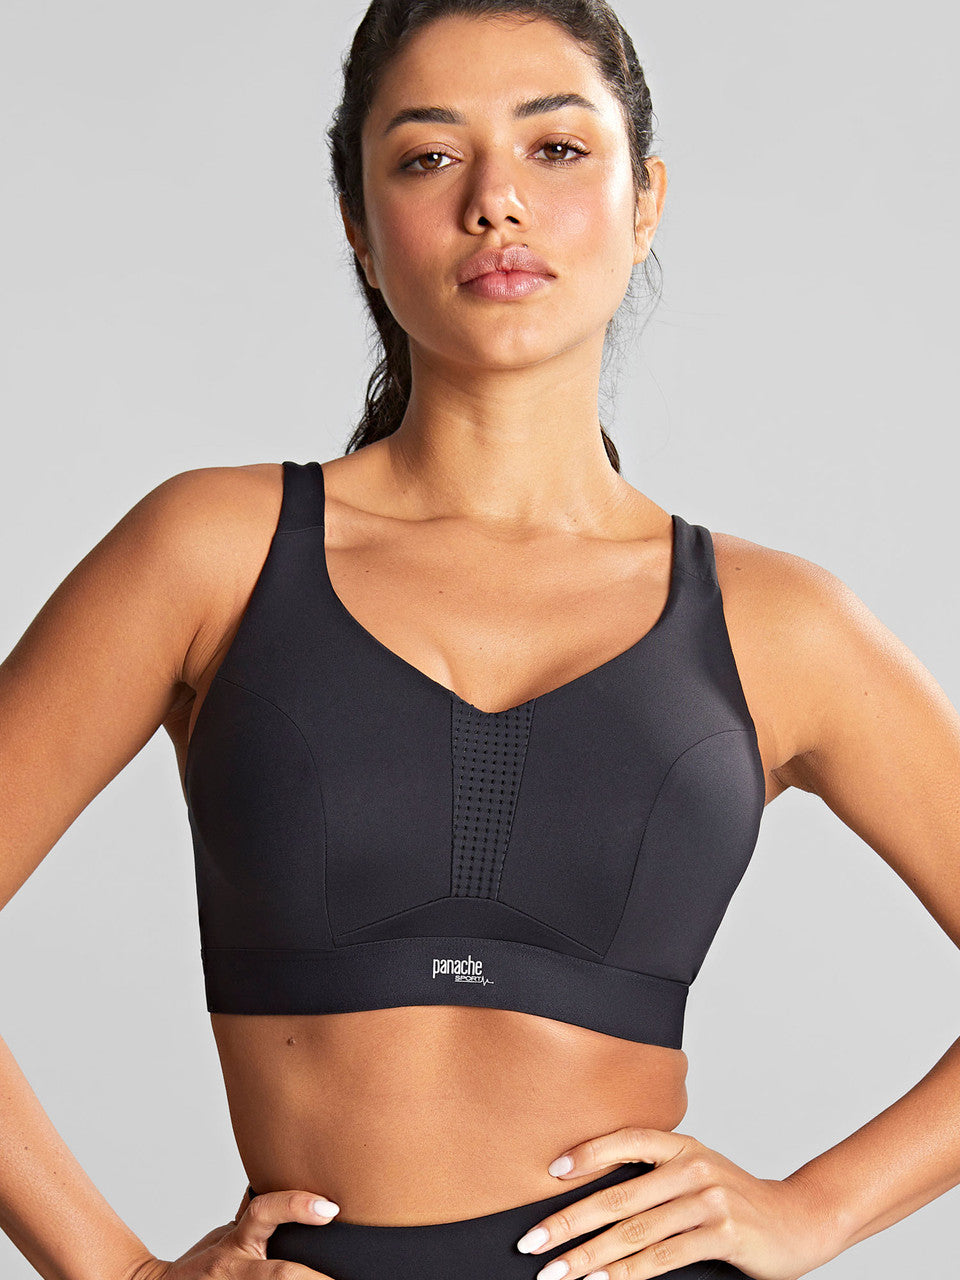 Ultra Perform Non-Padded Wired Sports Bra - Black worn by model front view